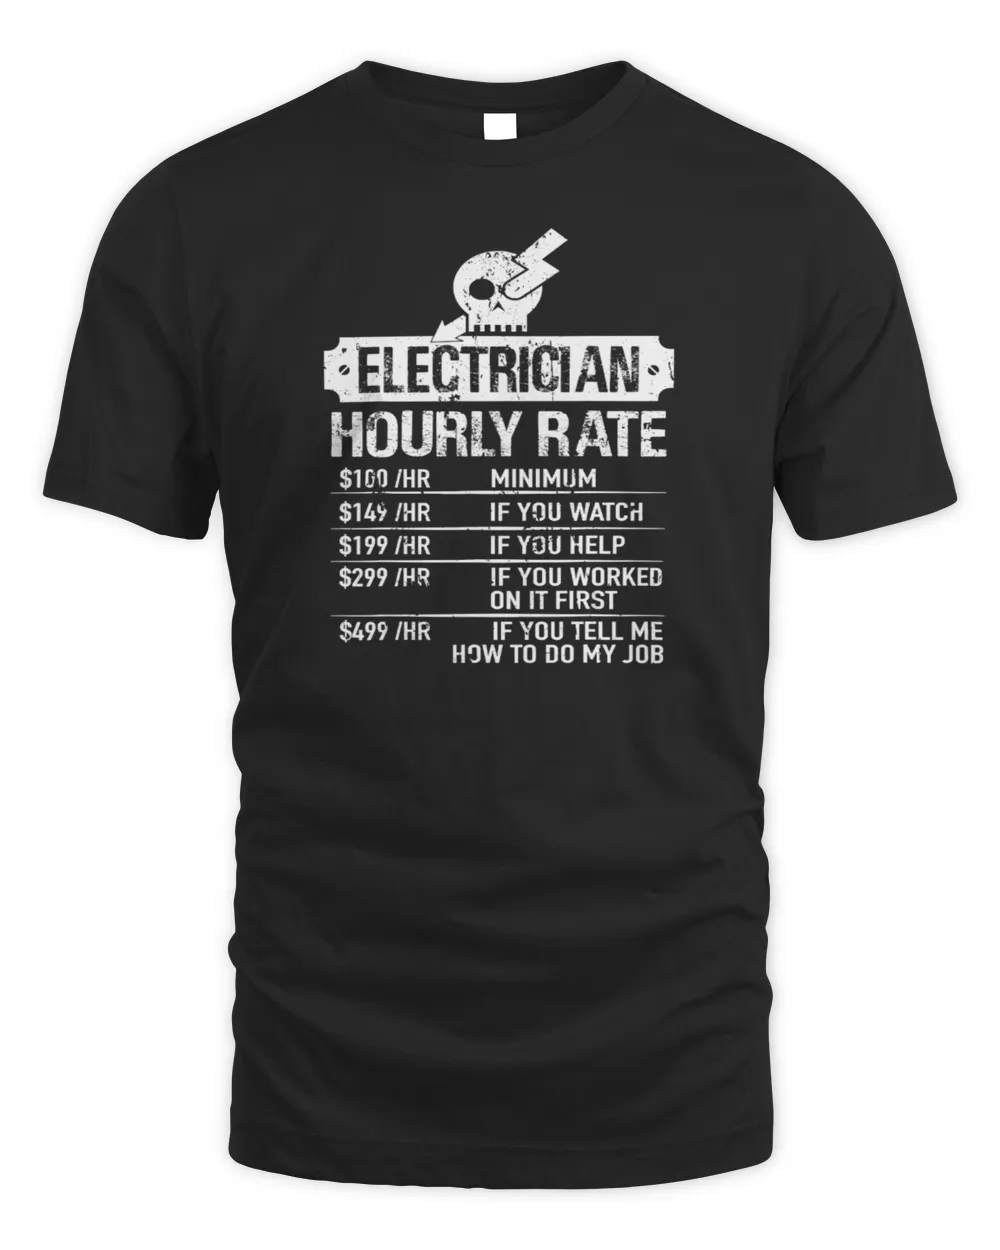 Electrician Hourly Rate - Funny Electrical En